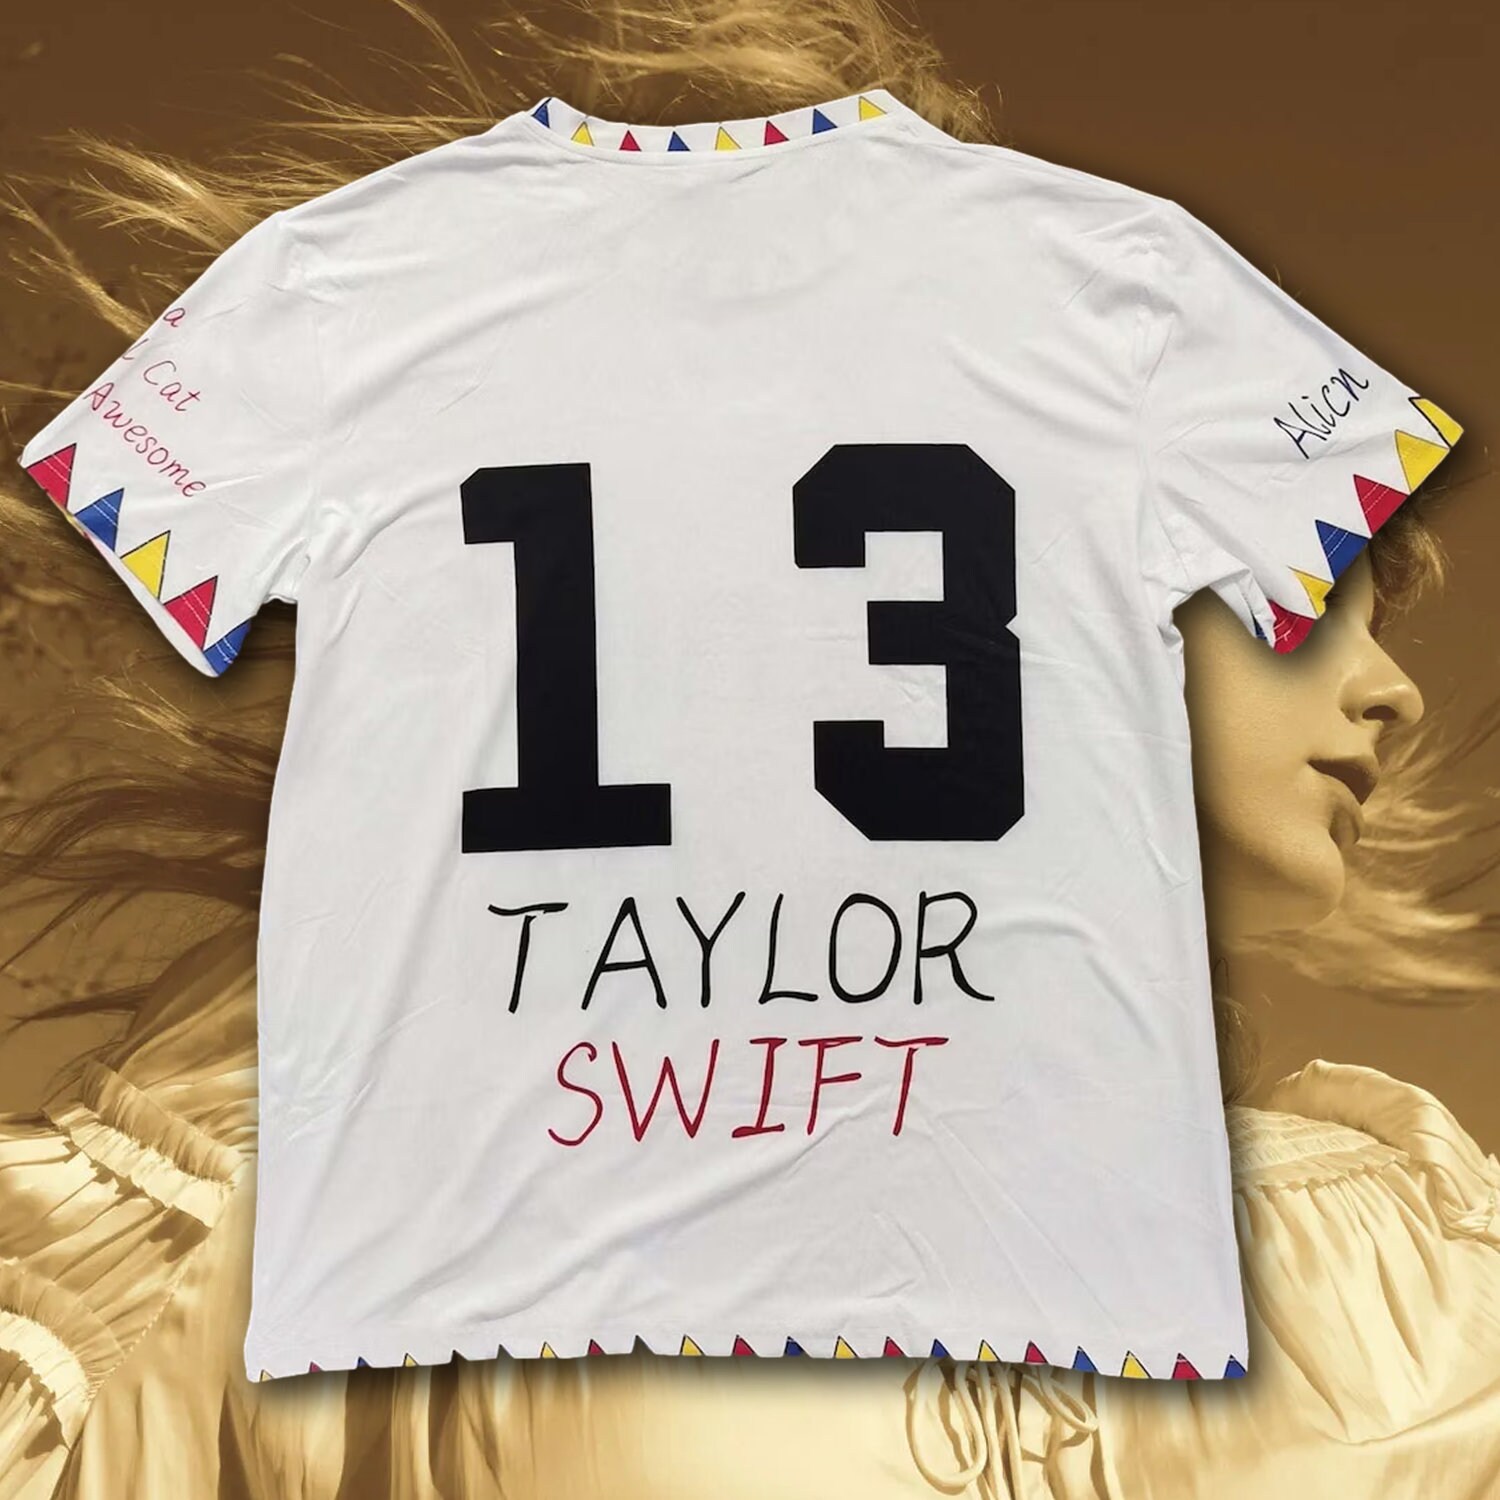 Junior Jewels T-shirt, Taylor Swift, You Belong With Me Shirt From Music  Video, Handmade -  Canada